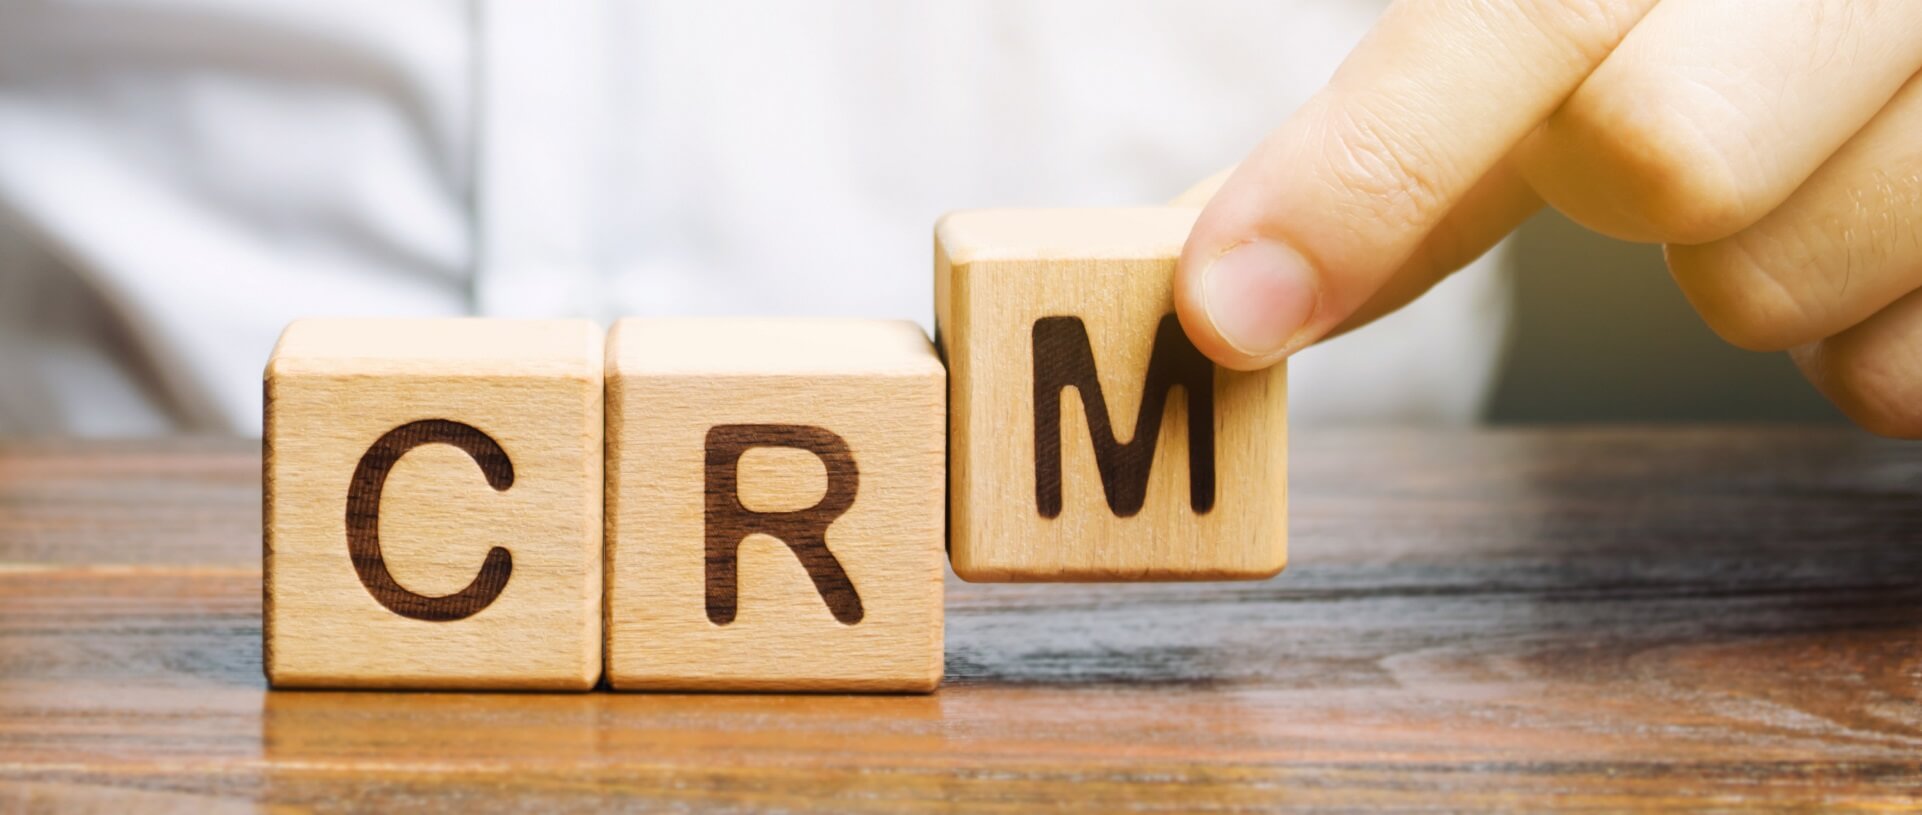 WHICH CRM IS BEST?